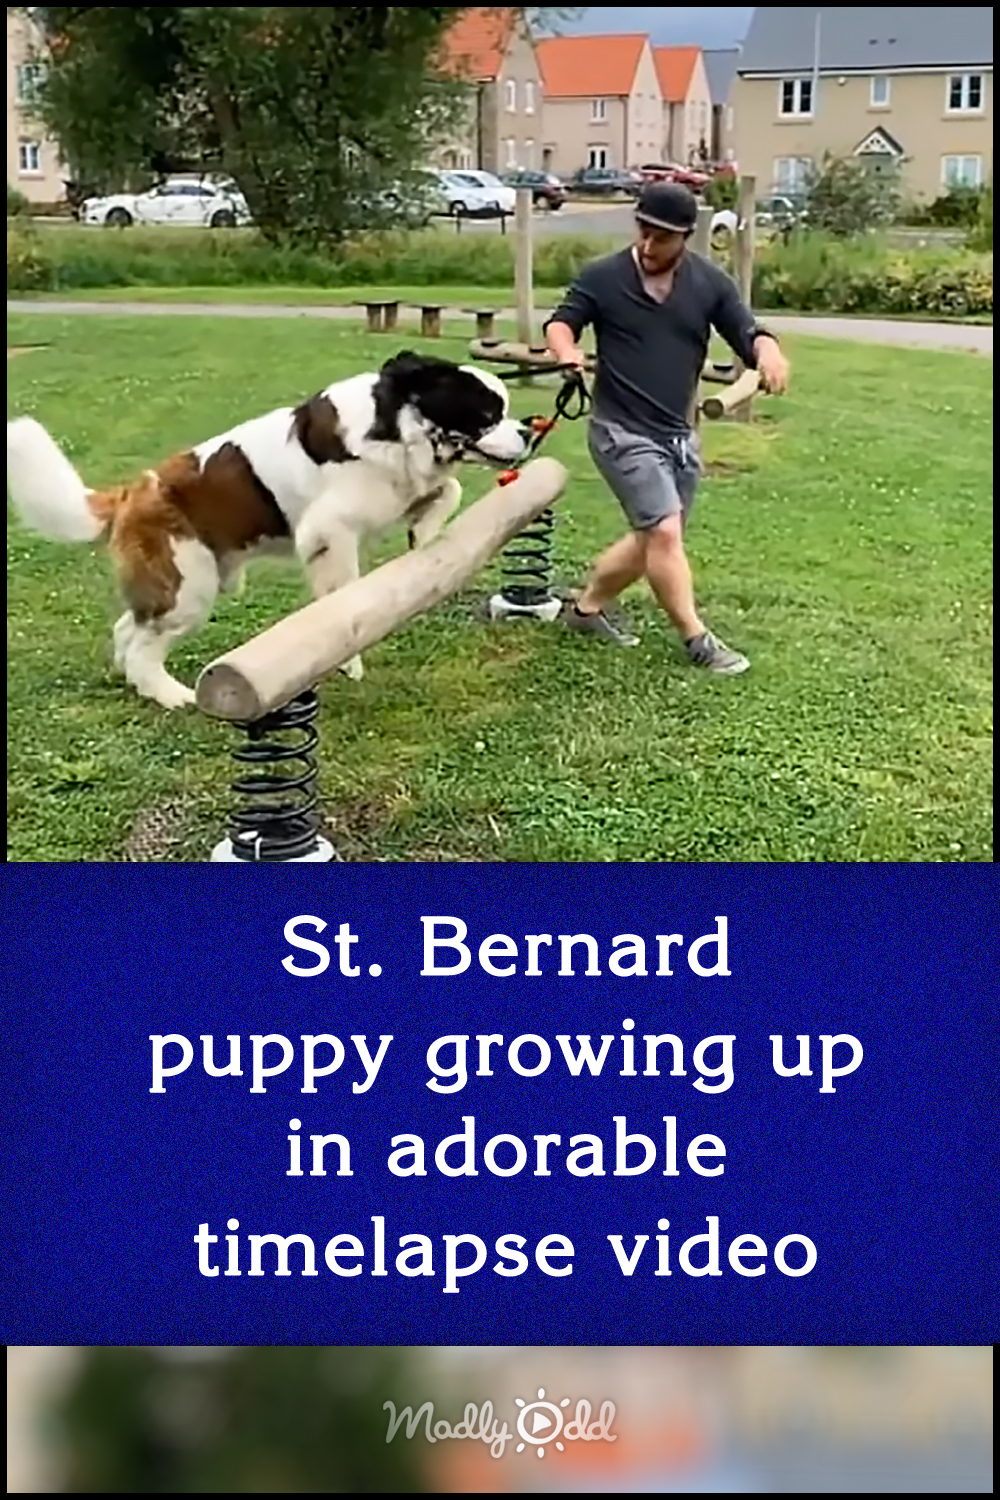 St. Bernard puppy growing up in adorable timelapse video